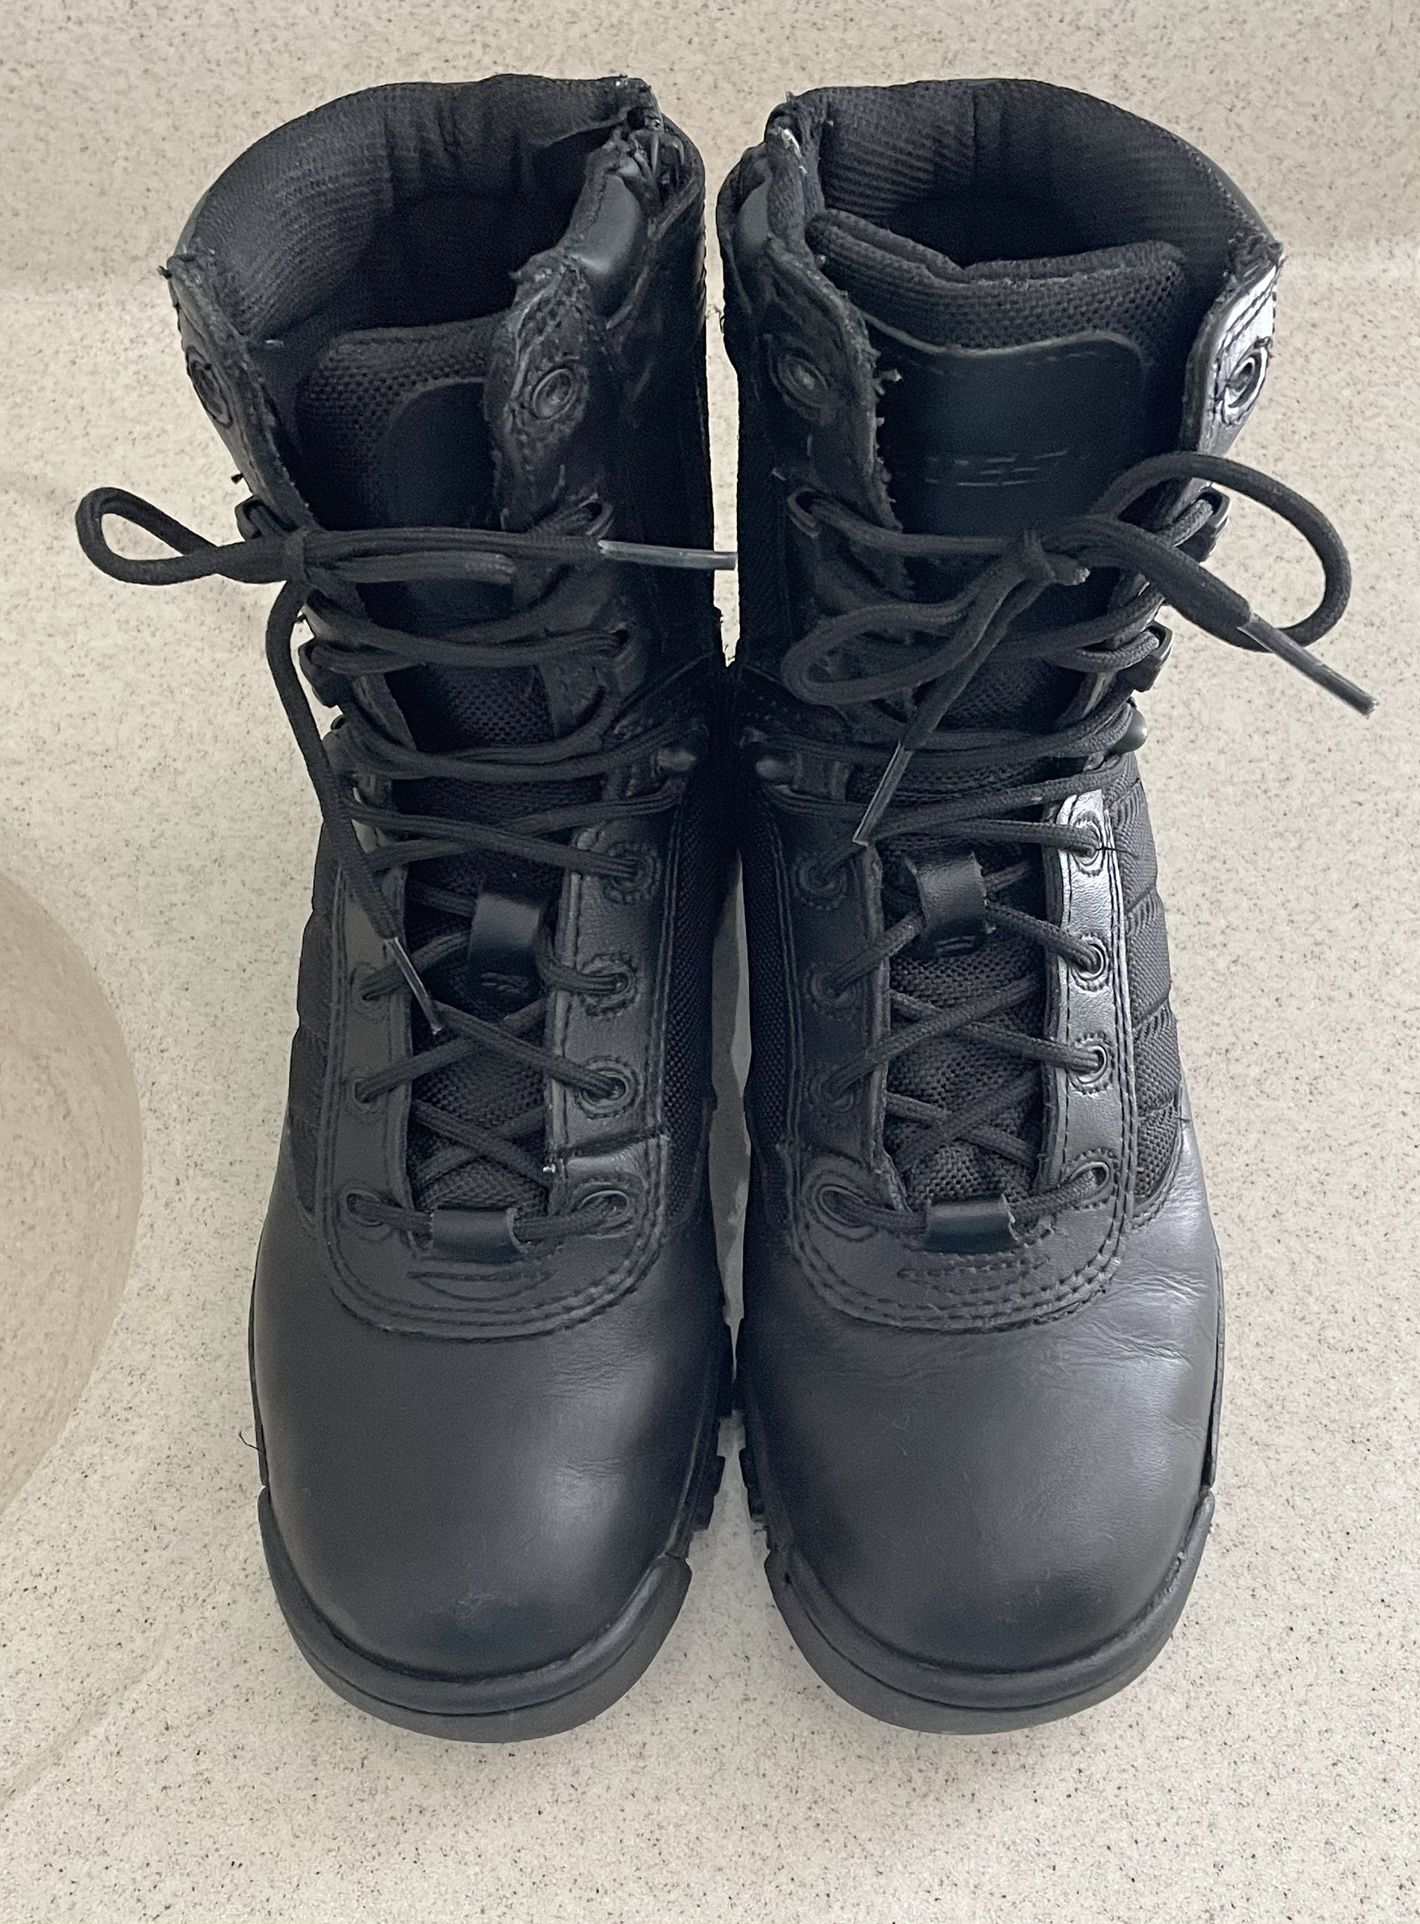 Bates Black Tactical Military EMS Hiking Boots